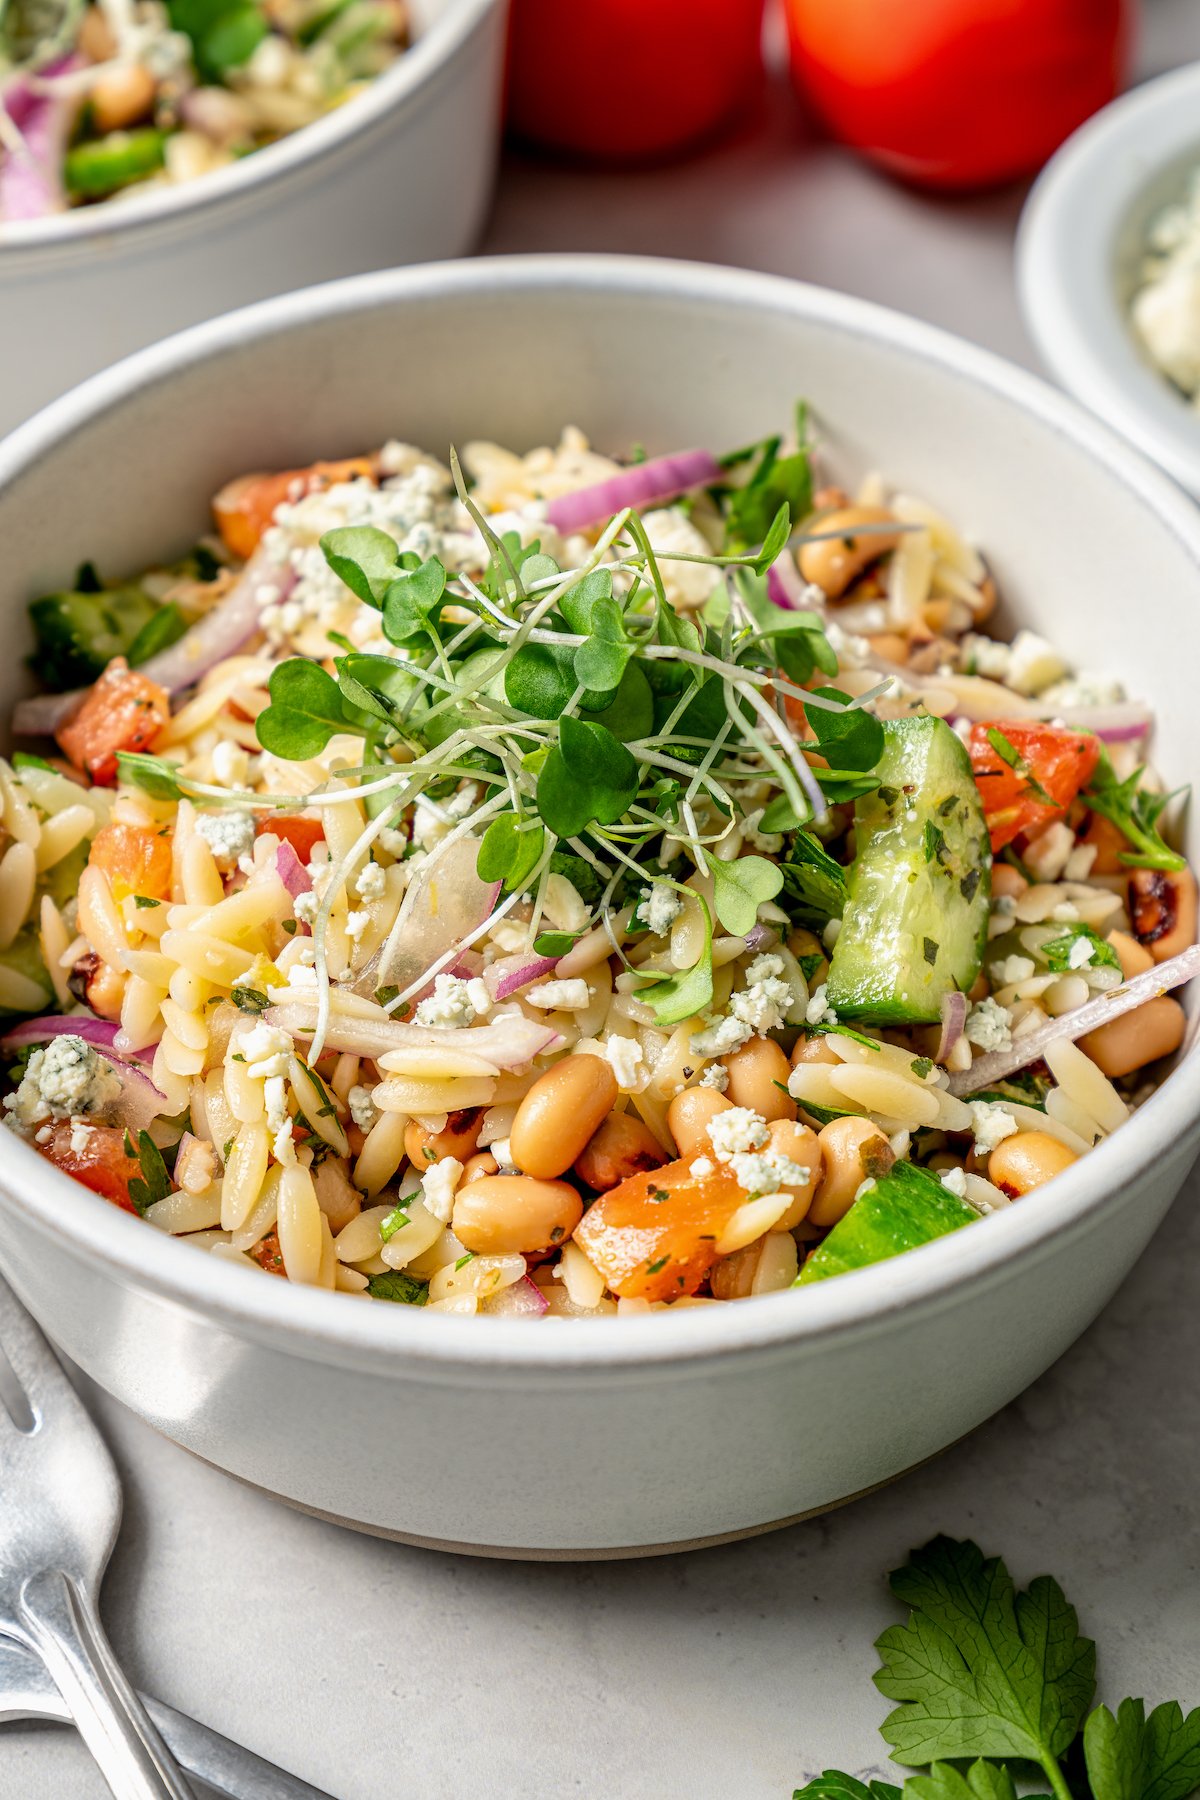 Black-eyed pea salad with blue cheese.